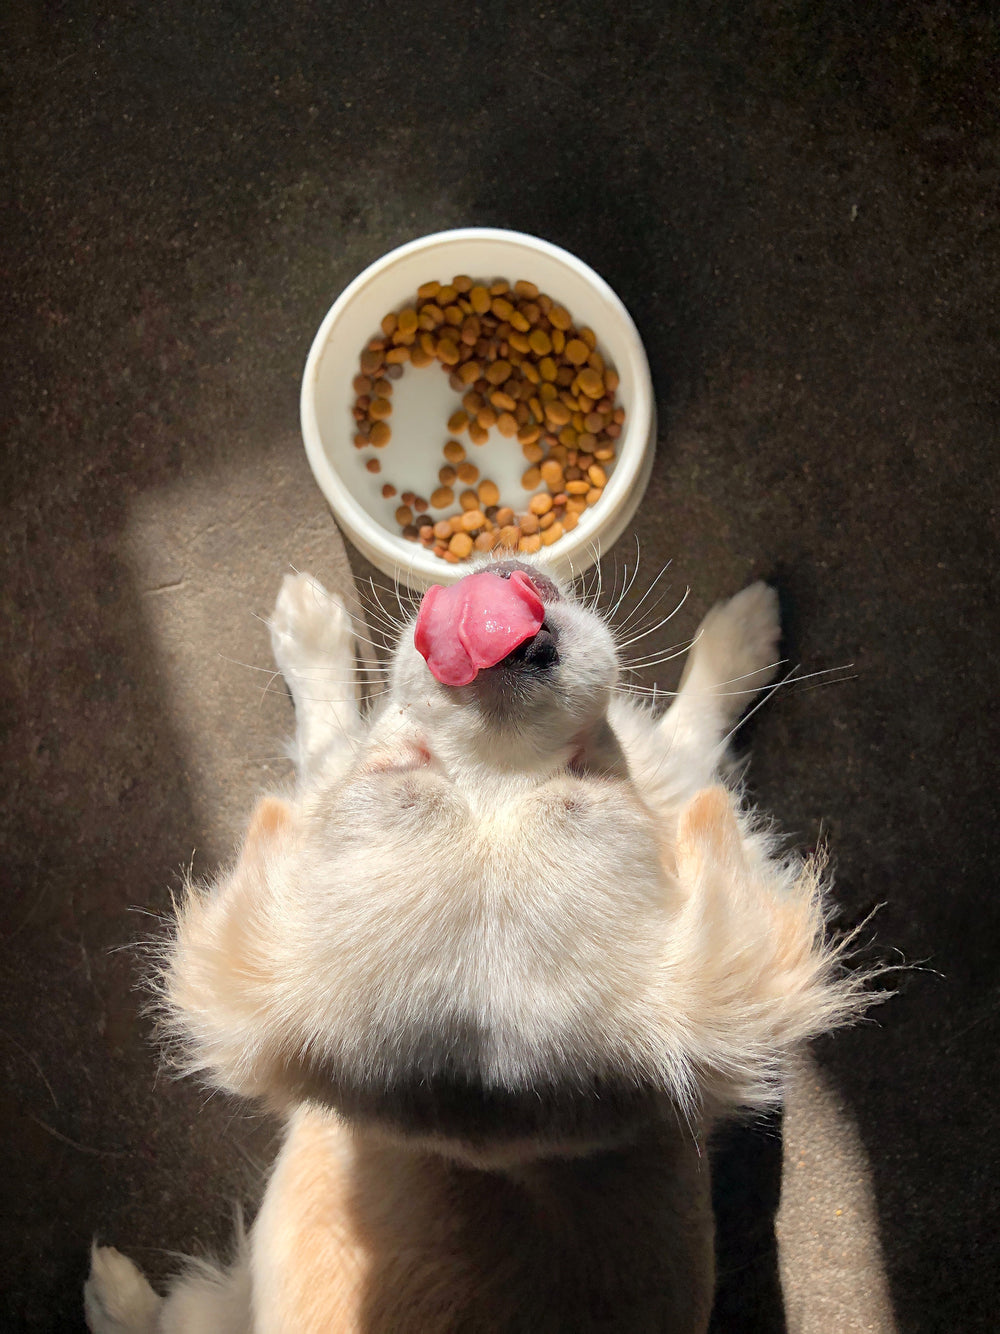 5 Simple Changes You Can Make to Improve Your Dog's Diet